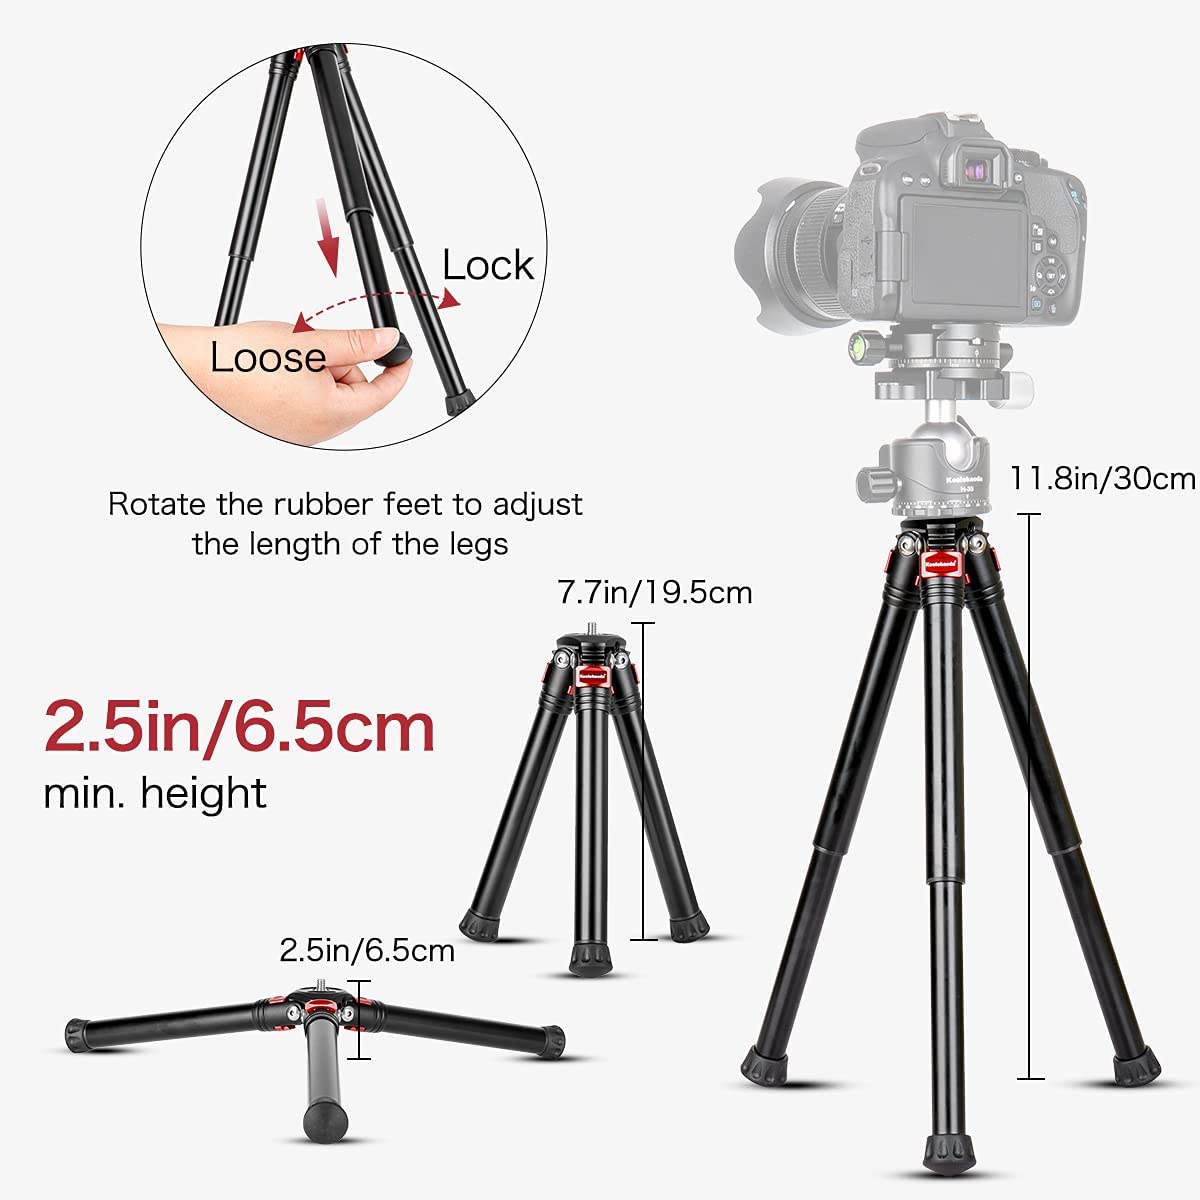 TF-19 Mini Tripod, All Metal Tabletop Tripod Stand with Extendable Legs and 1/4 Inch Screw for DSLR Cameras,Projector and Monopods